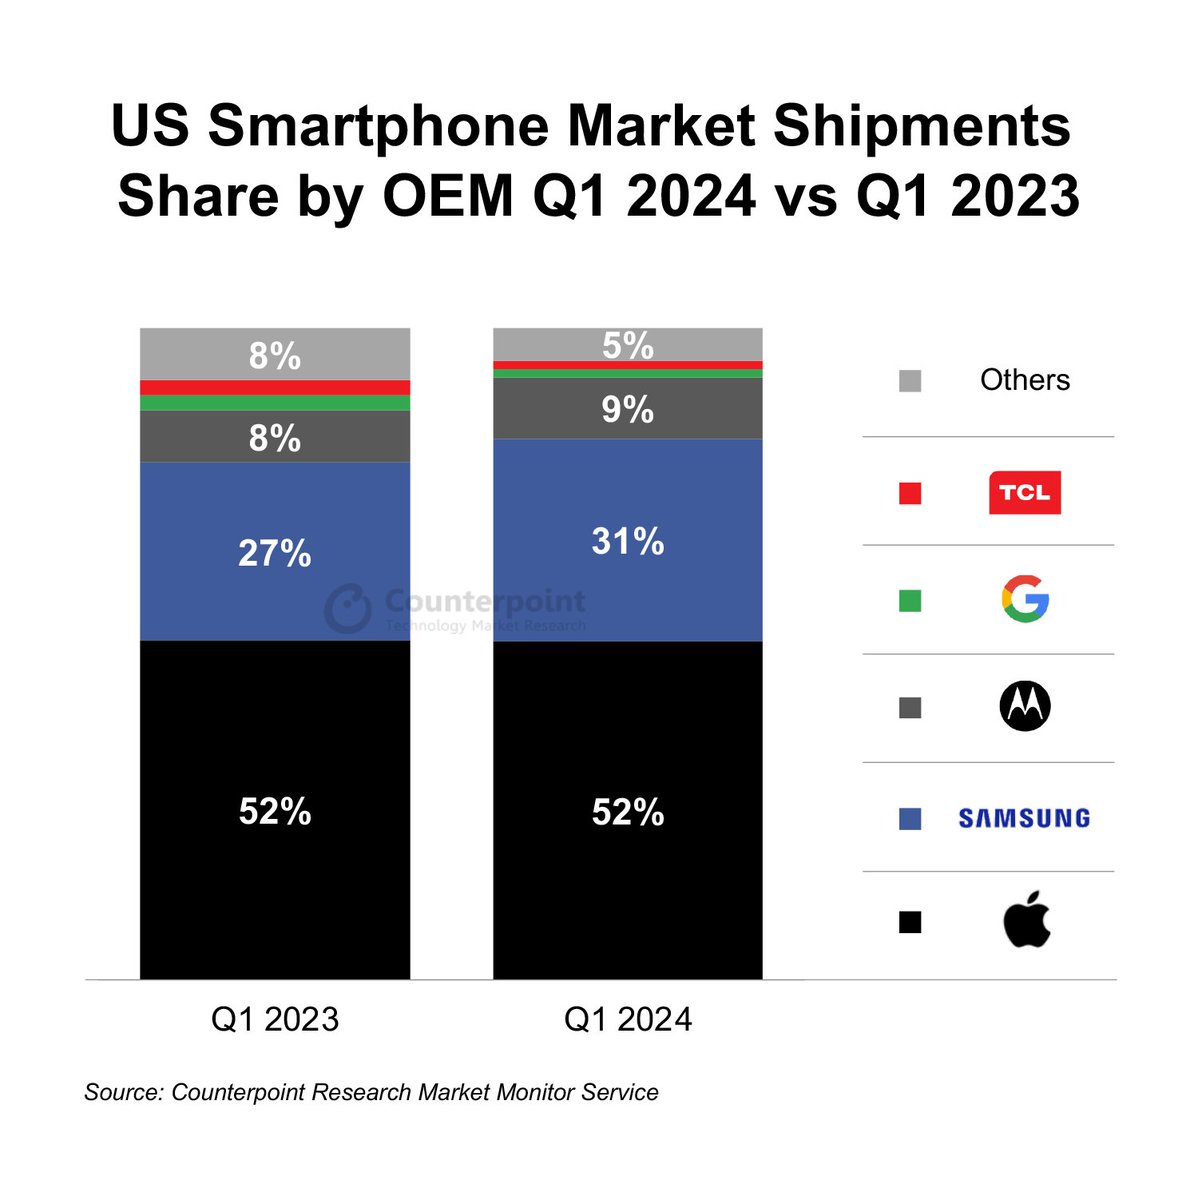 Just published: US Smartphone Shipments Decline YoY for Sixth Consecutive Quarter Key takeaways: - US smartphone shipments declined 8% YoY in Q1 2024, the sixth consecutive quarter showing a YoY decline. - @Samsung’s market share grew to 31%, its highest Q1 share since Q1 2020.